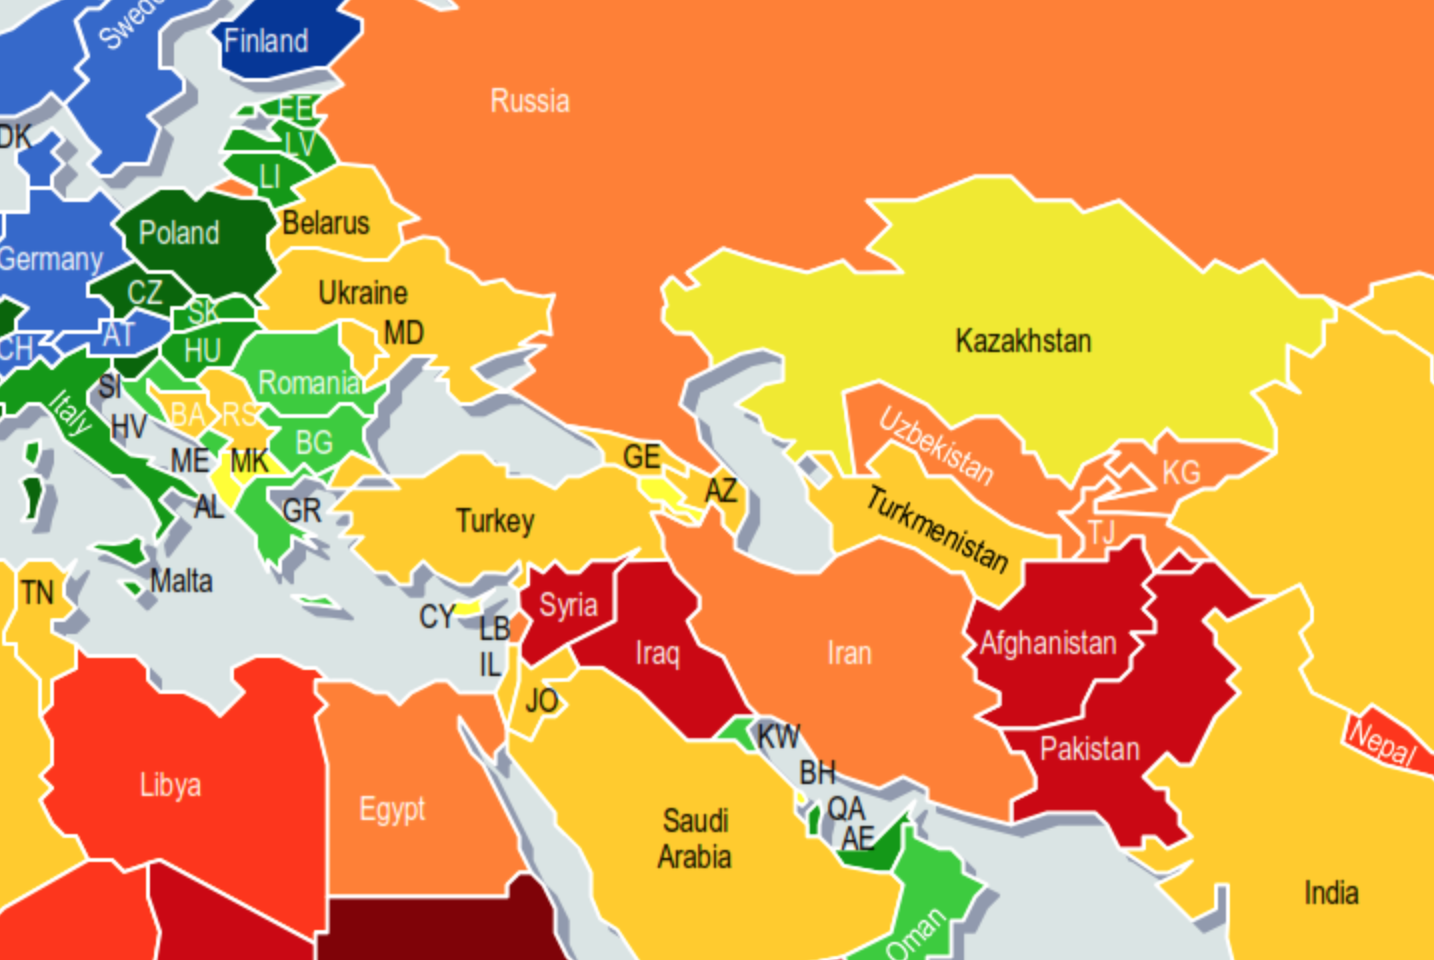 Fragile States Index: Armenia More Stable Than All of its Neighbors